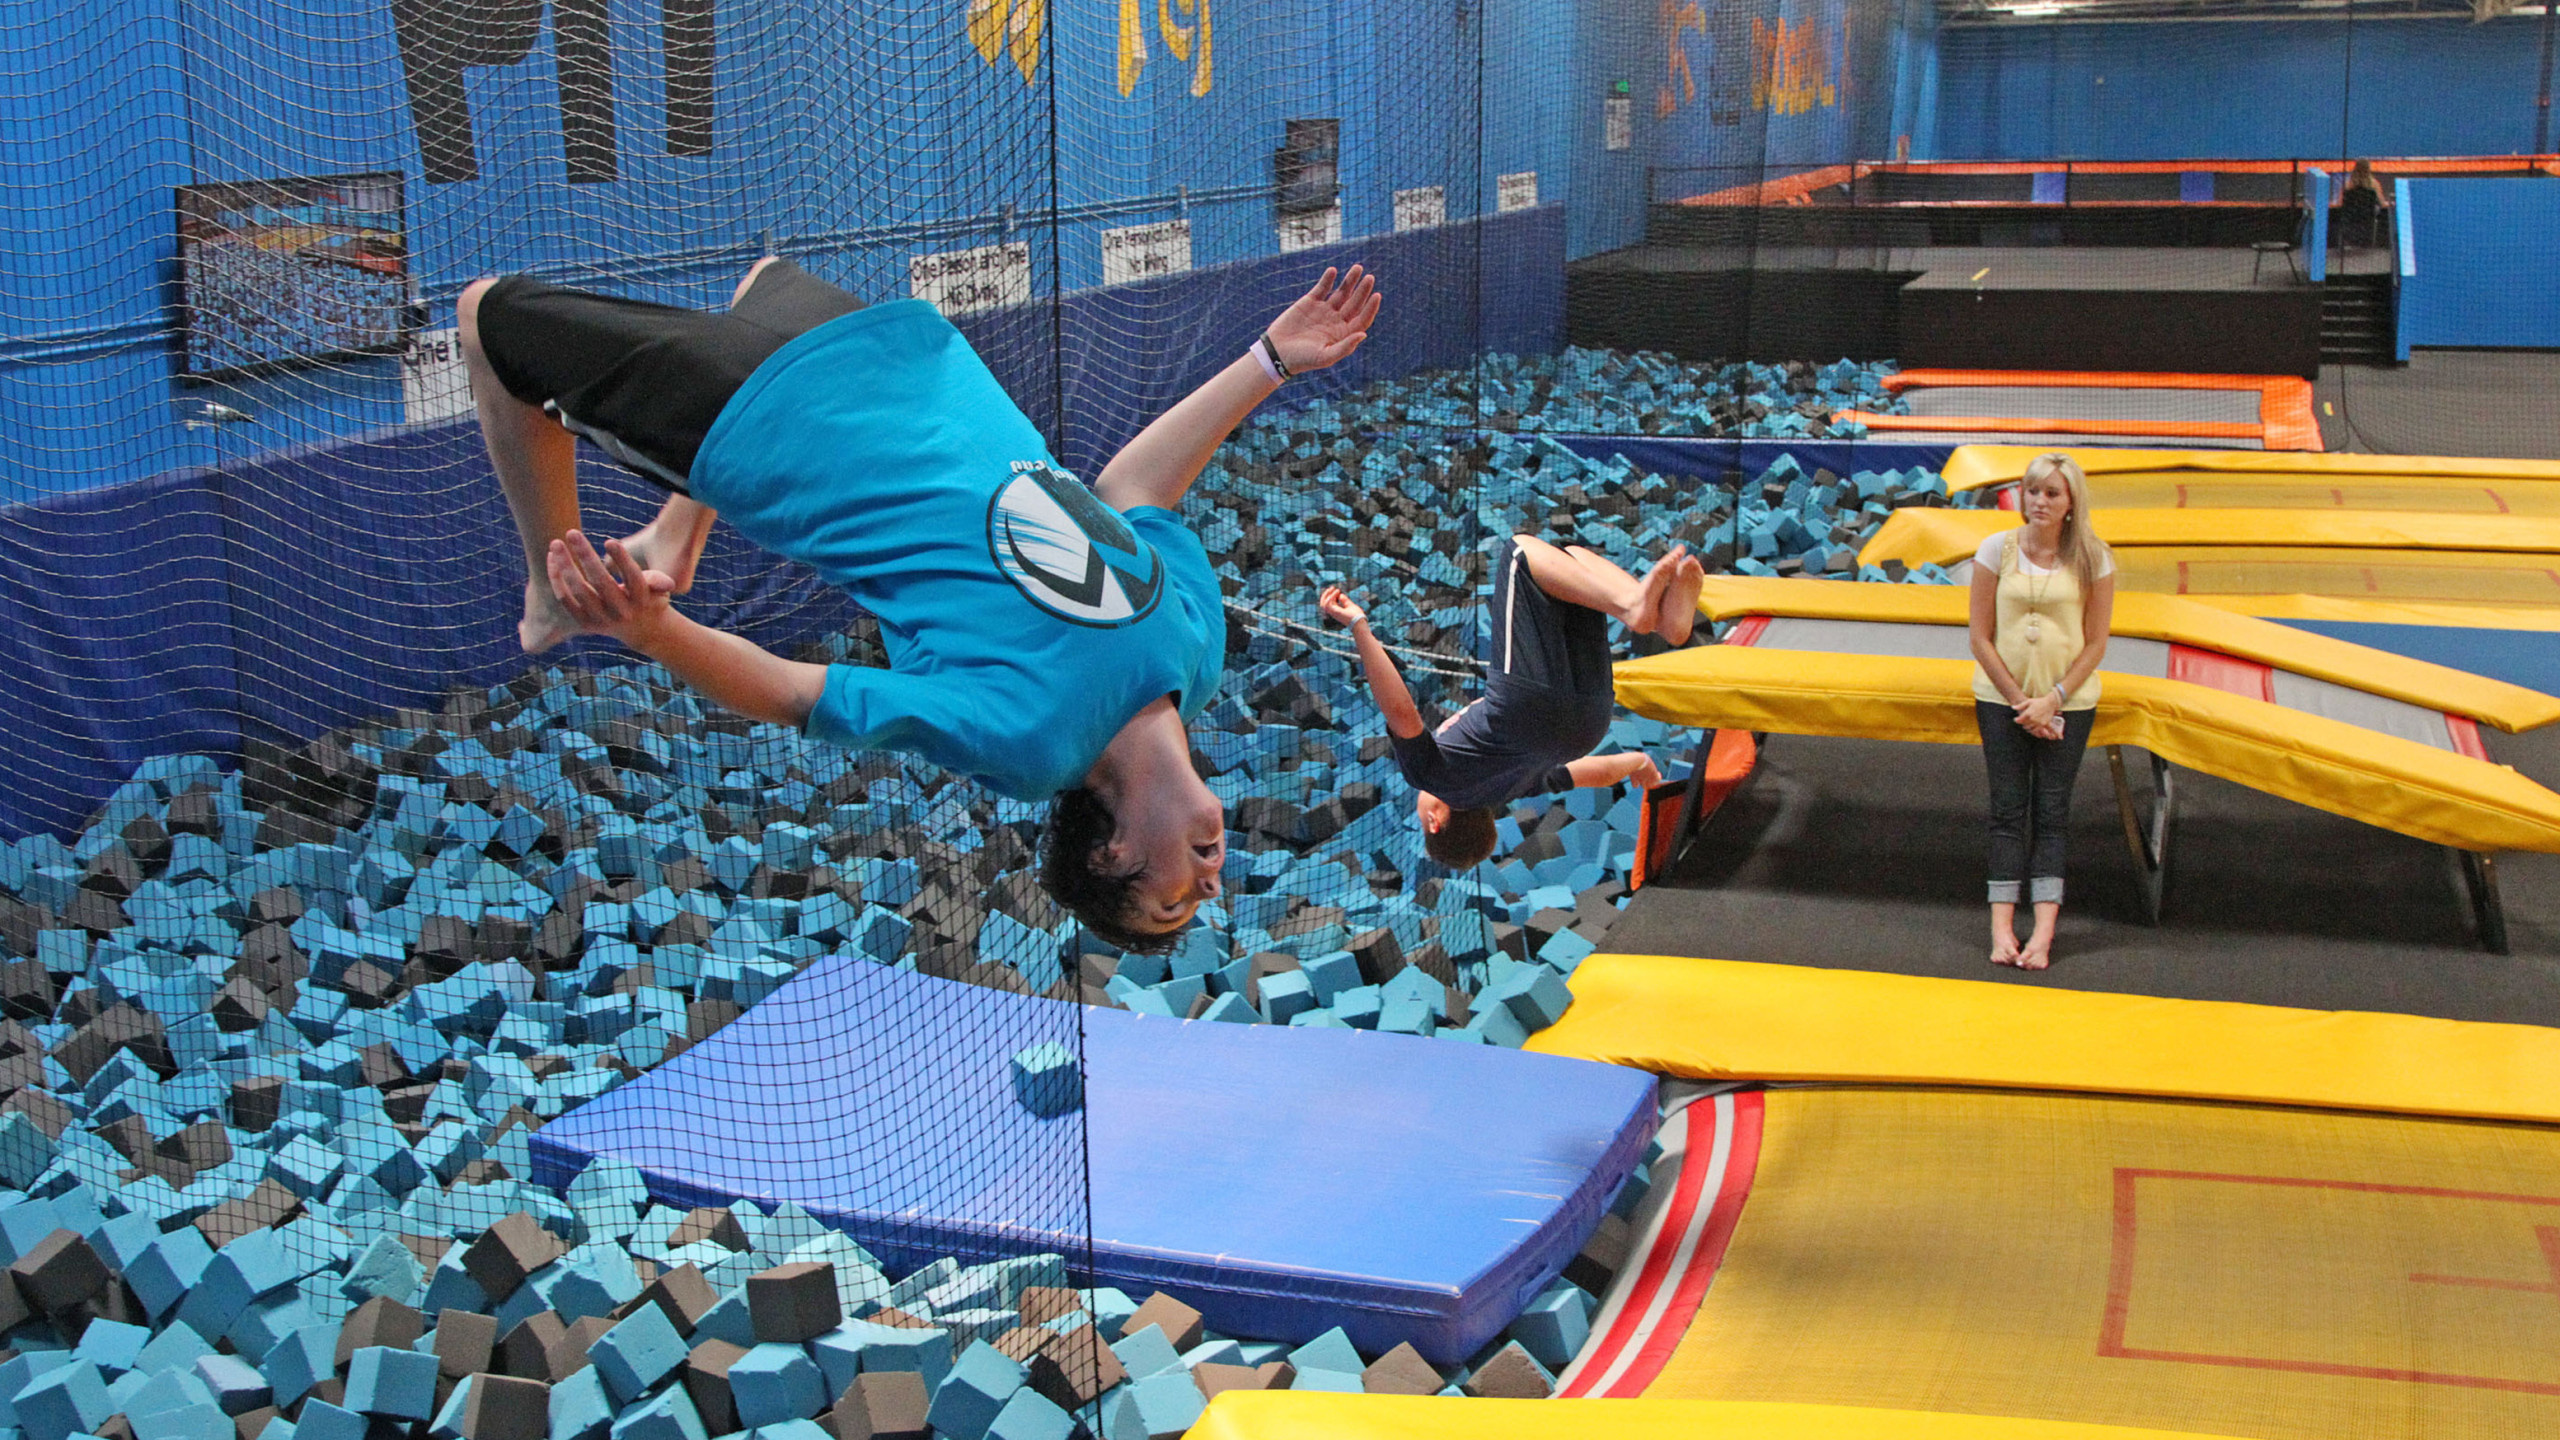 Trampolining: A trampoline park - a leisure facility with various types of jumping equipment available. 2560x1440 HD Wallpaper.